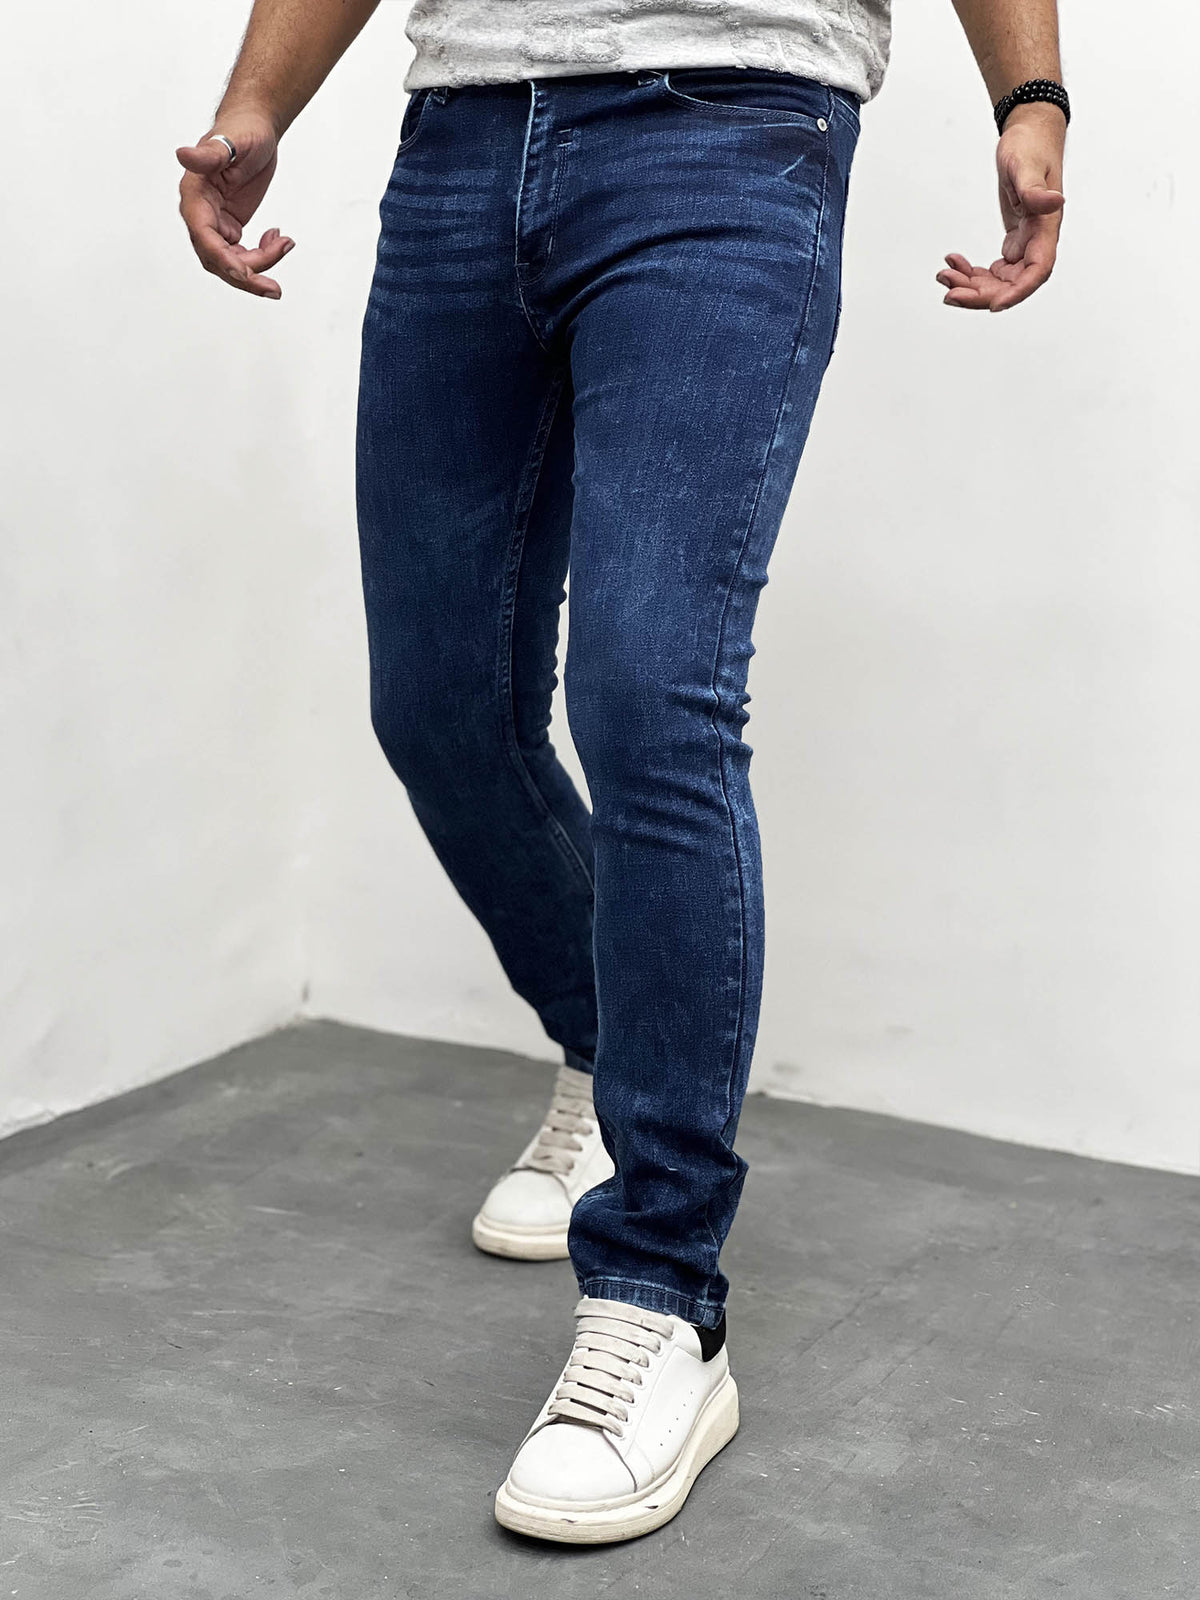 Turbo Slim Fit Jeans In Dirty Blue